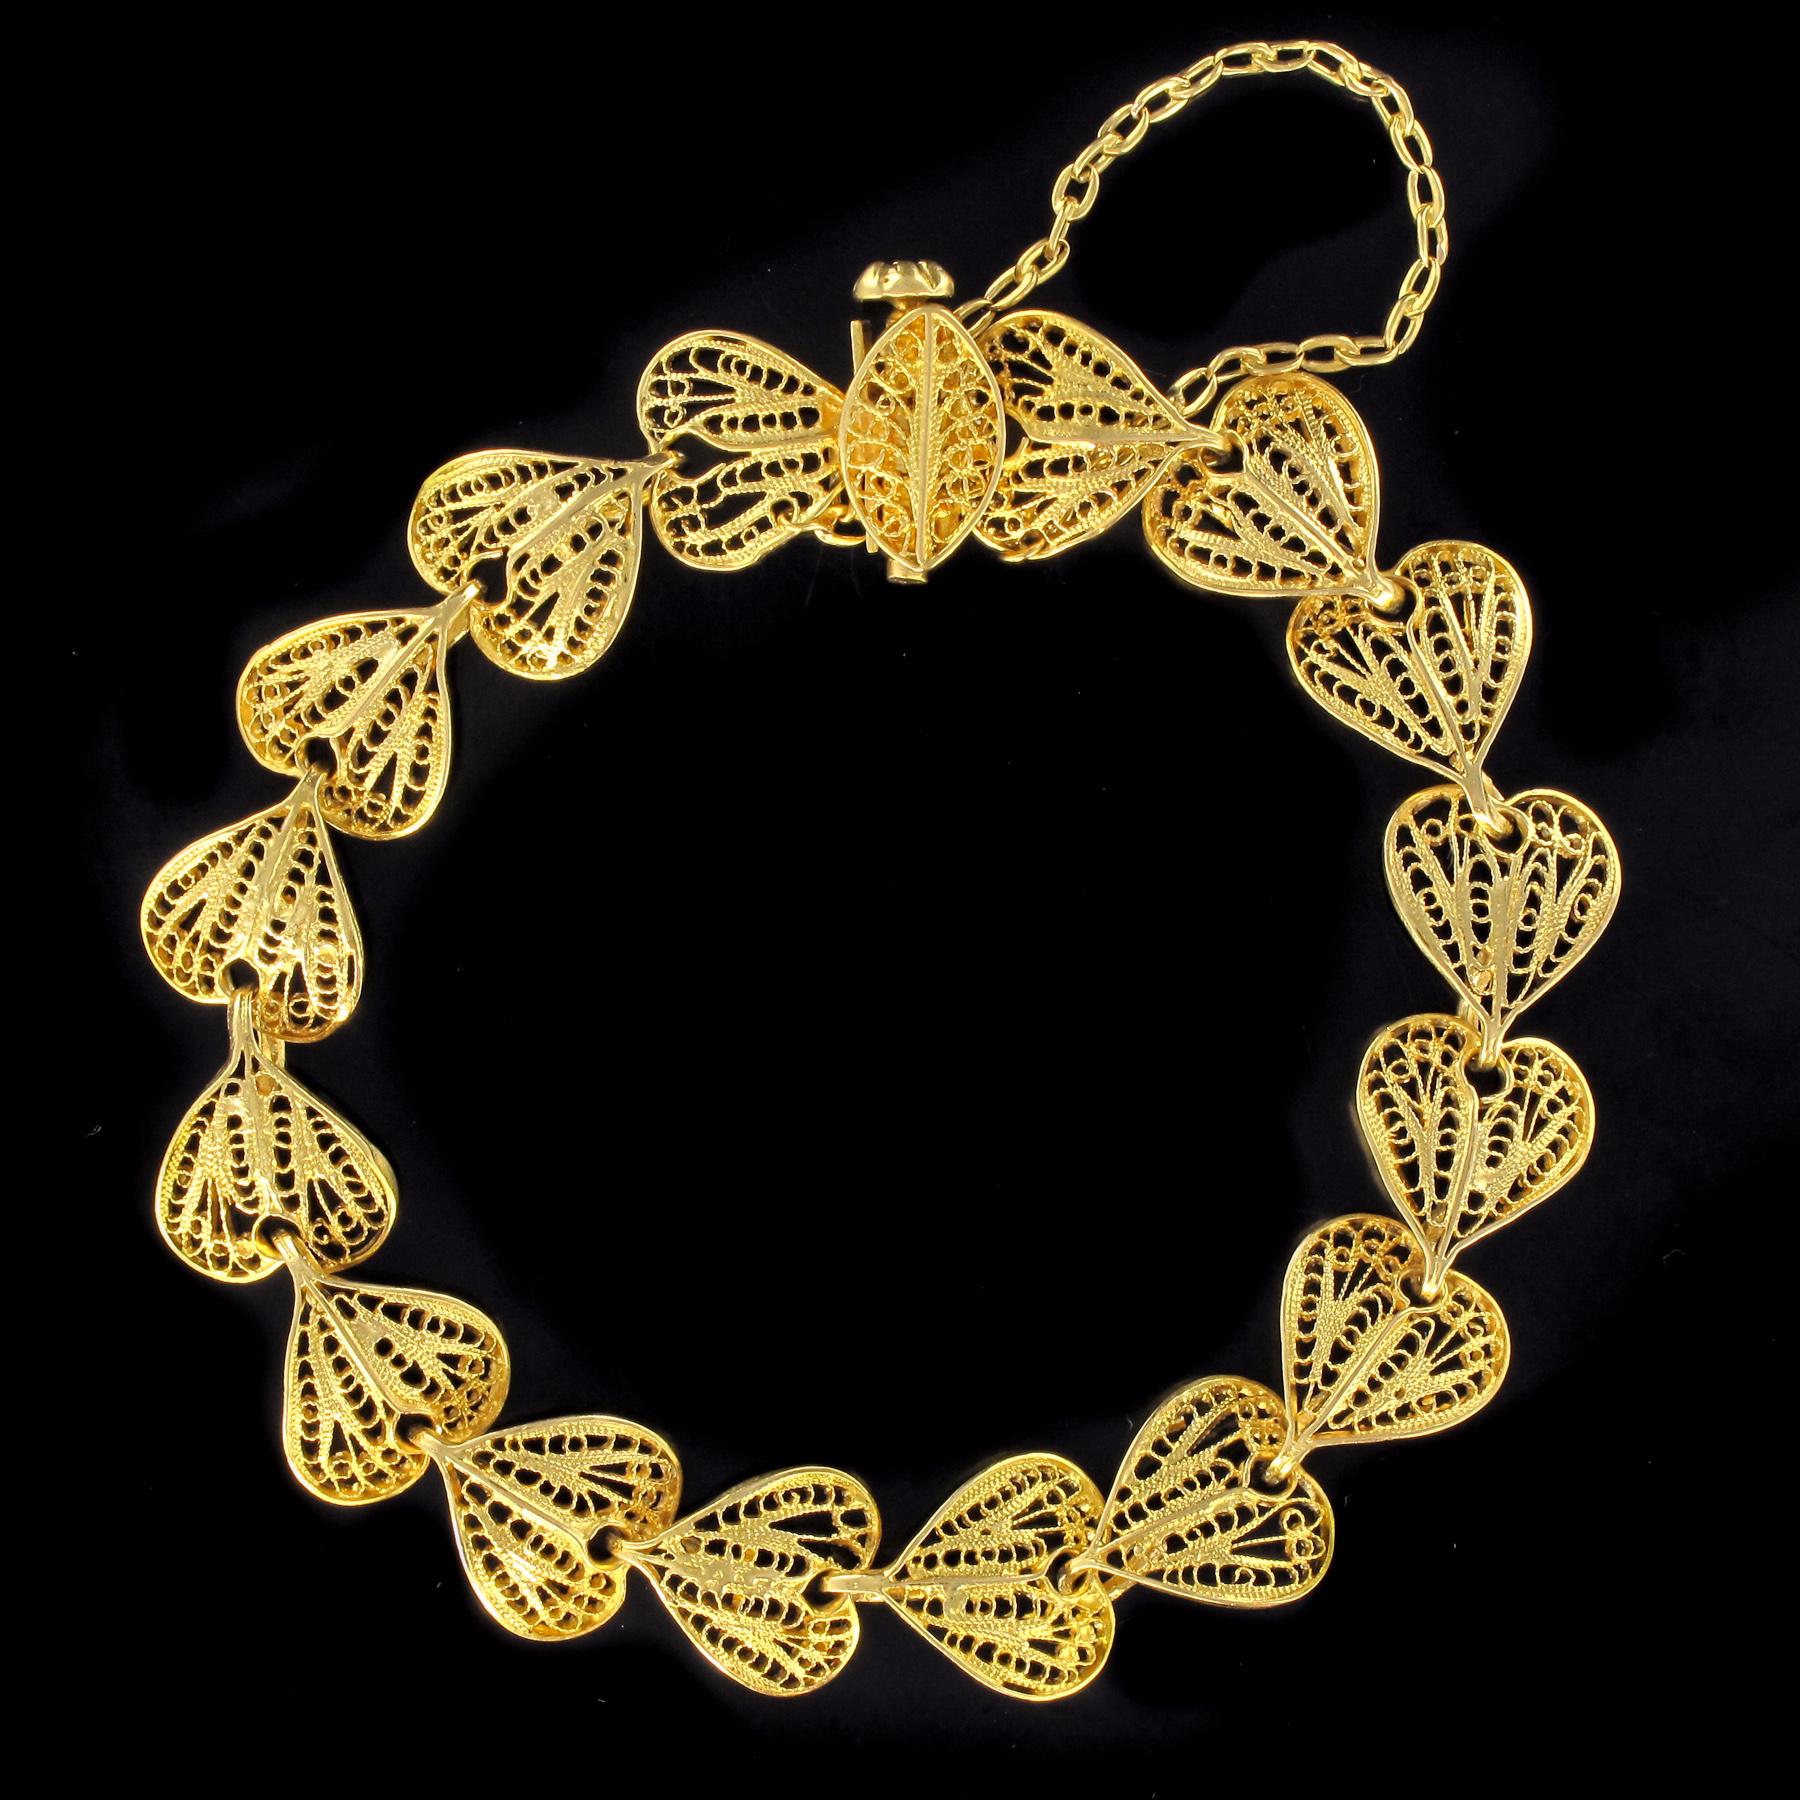 Bracelet in 18 carats yellow gold.
Link bracelet, it consists of links in the form of hearts openwork filigree. The clasp is screwed with safety chain.
Length: 18 cm, pattern width: 1.2 cm, clasp width: 1.5 cm, thickness: 4 mm.
Total weight of the